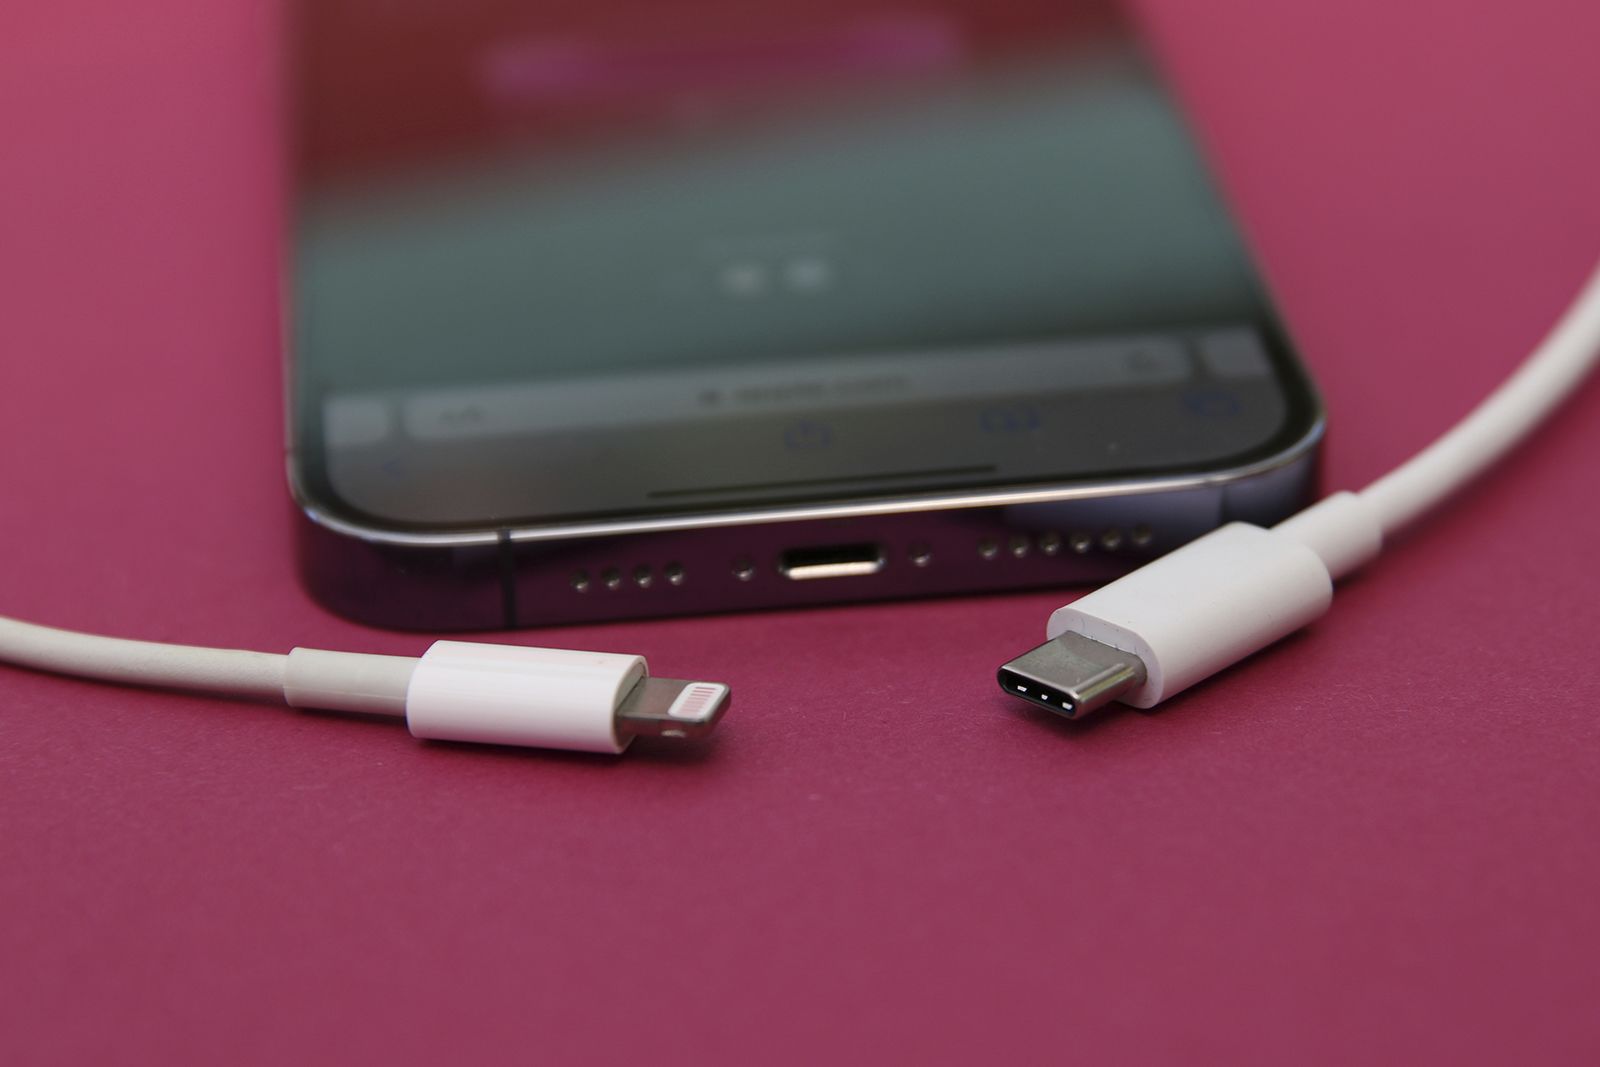 Here's why Apple's charger switch is such a big deal